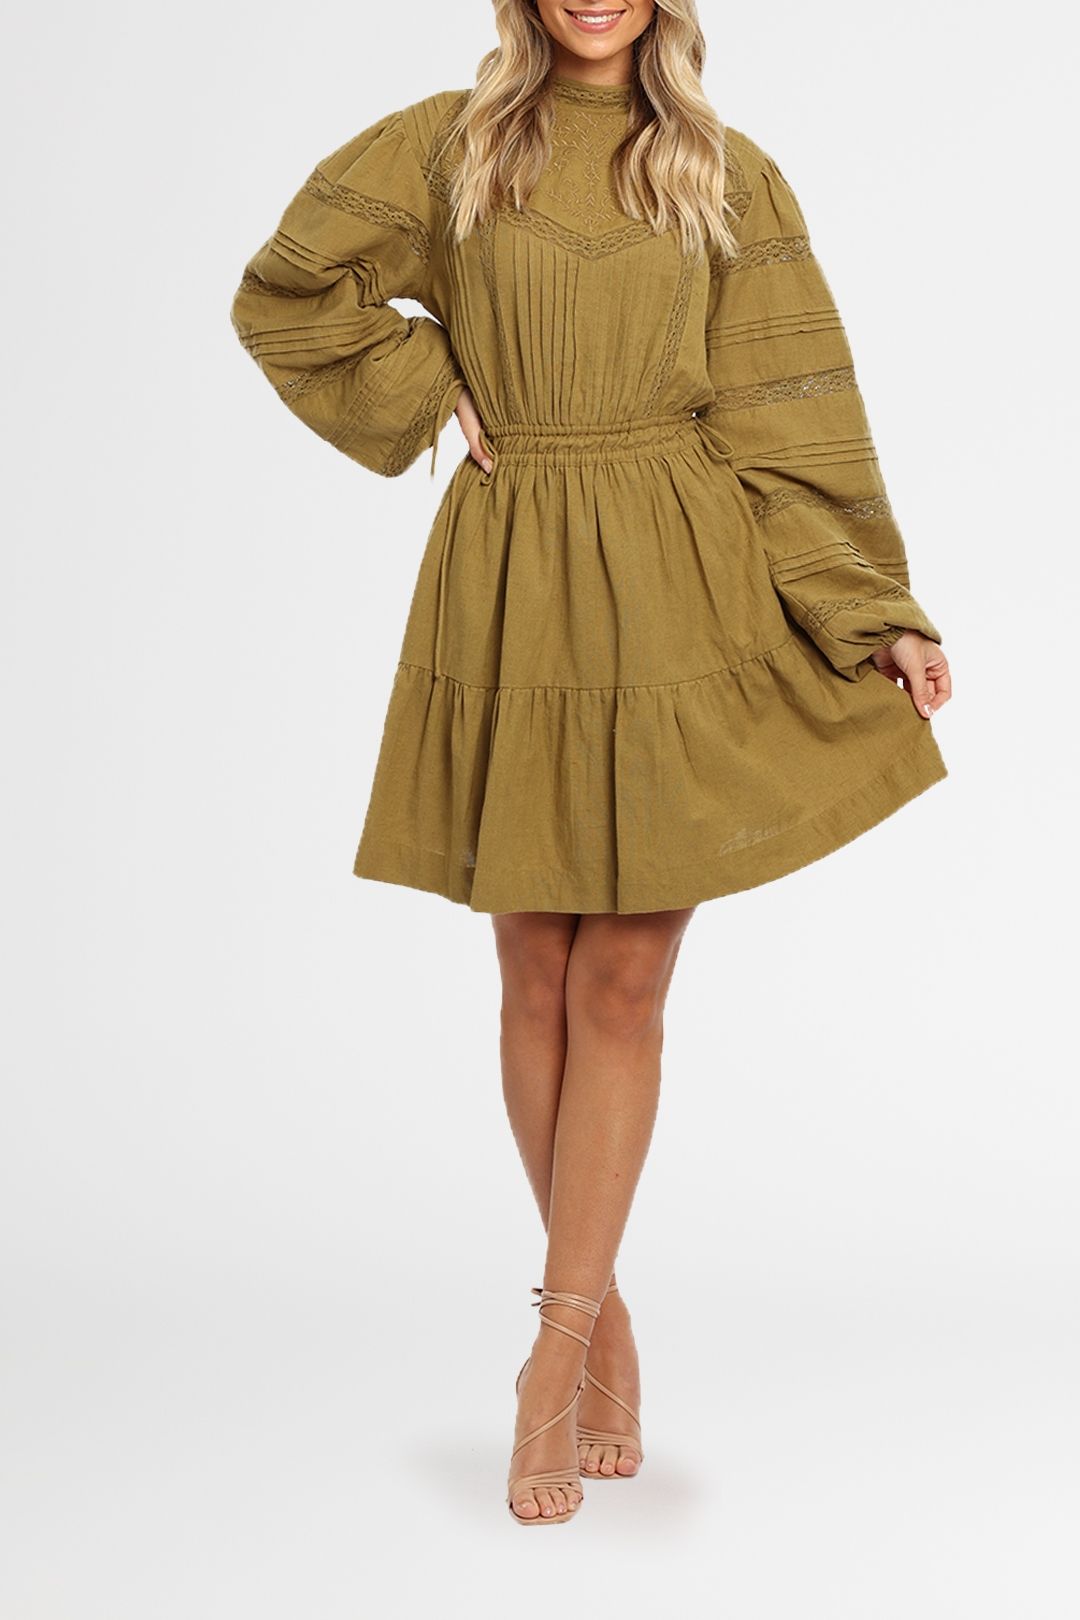 In Loom Golden Hour Dress - Simply Daisy Boutique